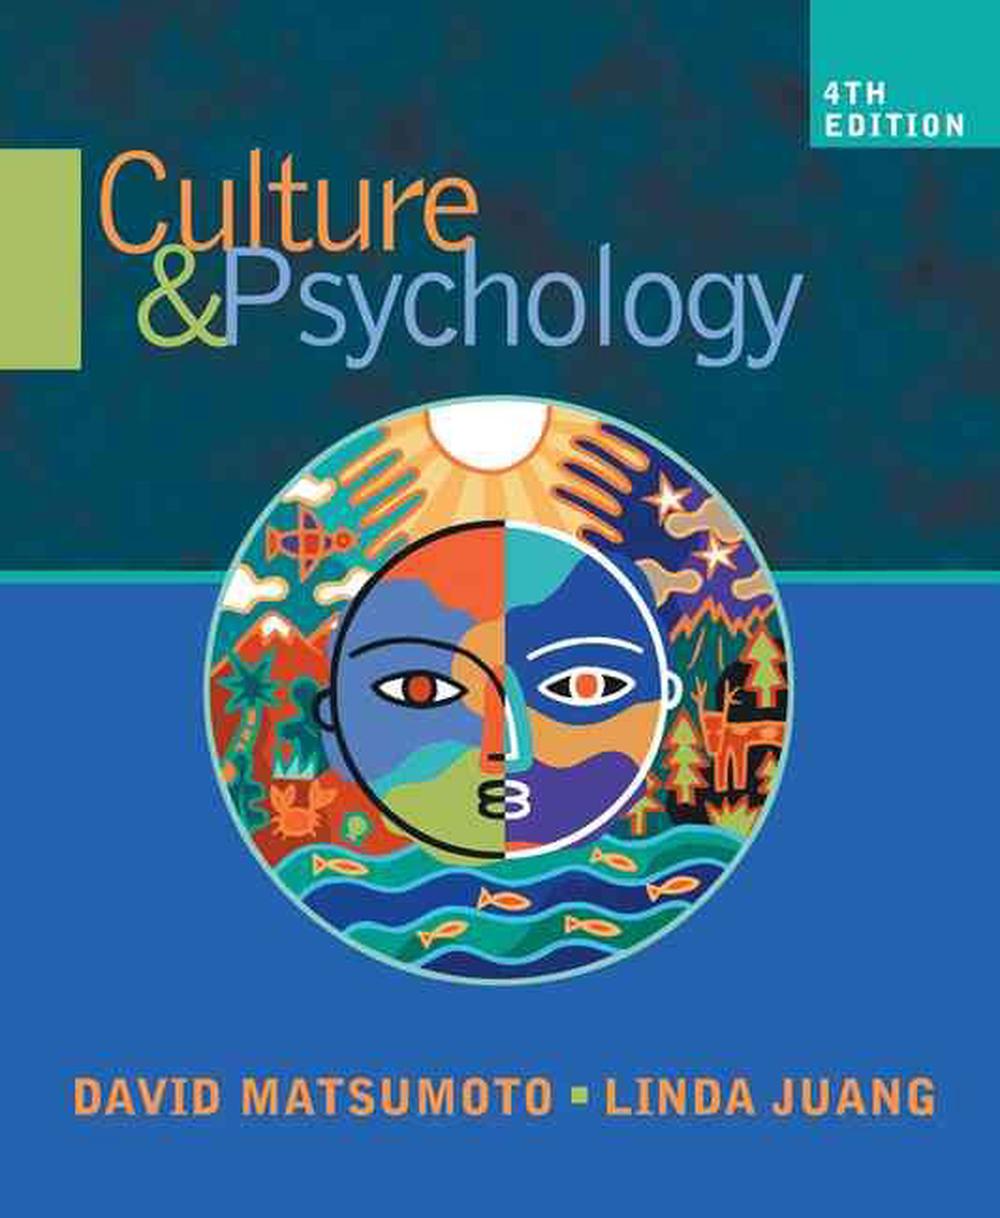 literature review on cultural psychology